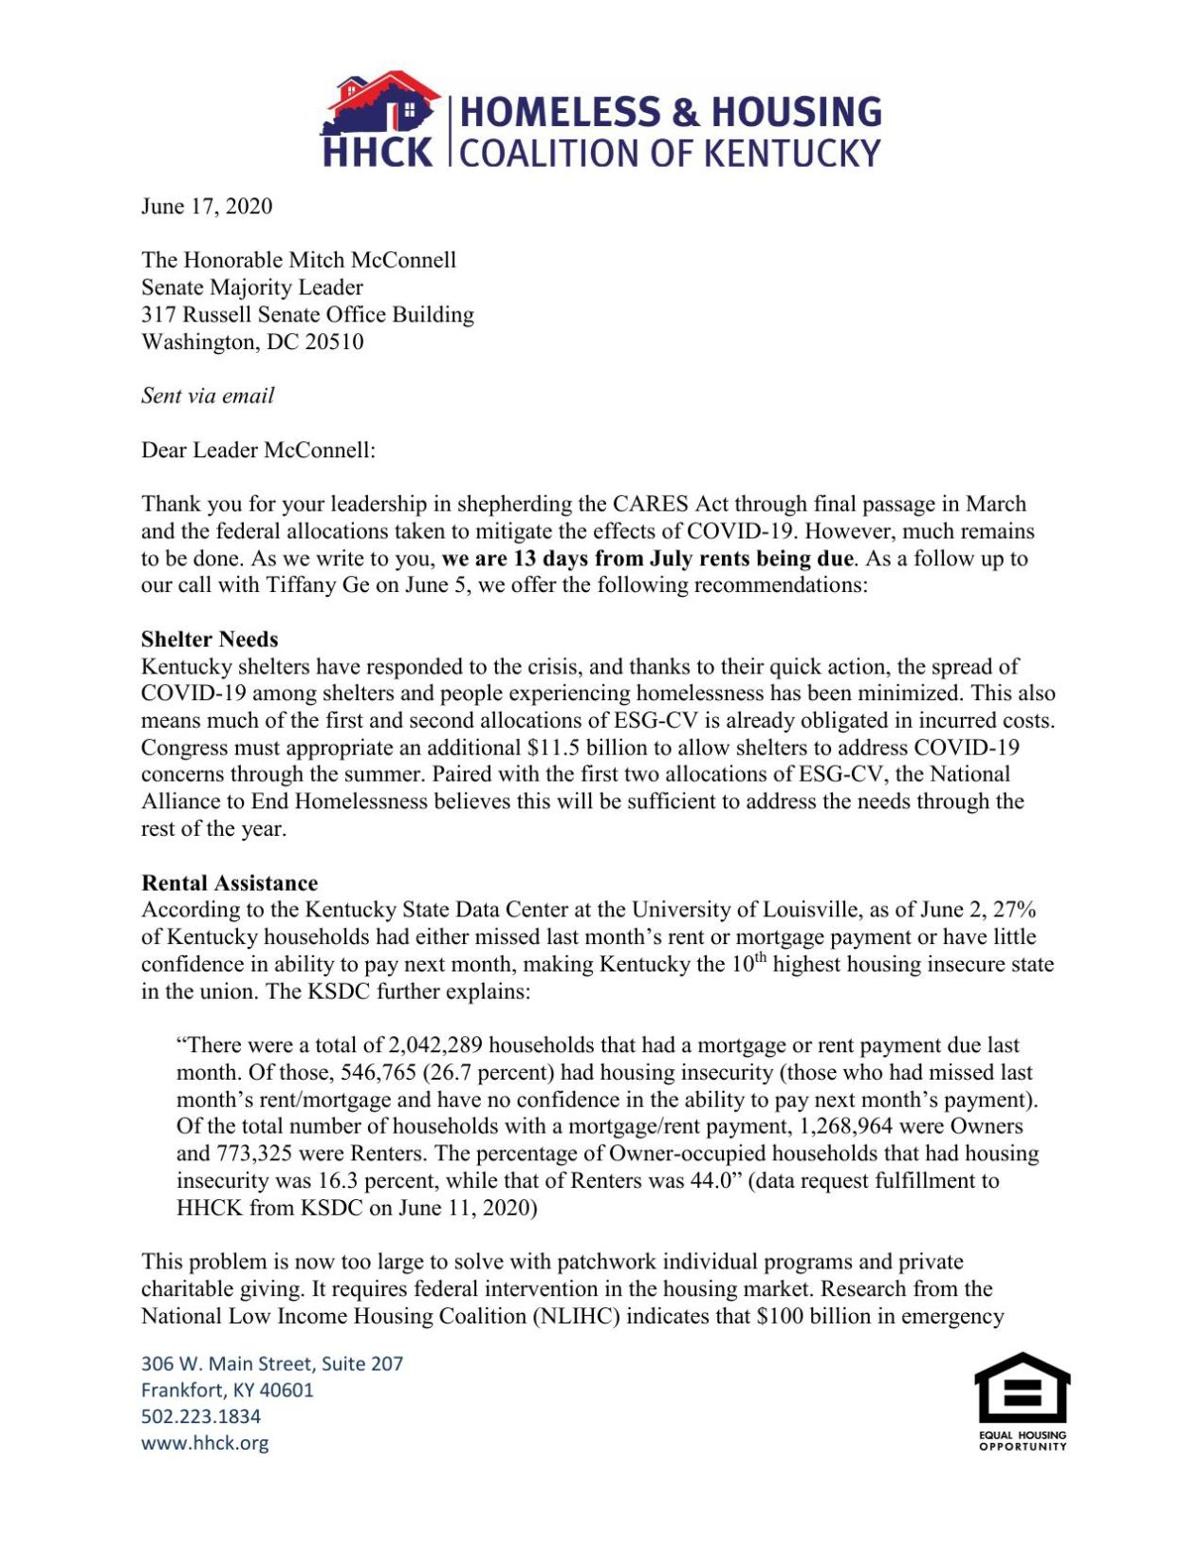 Homeless and Housing Coalition Letter